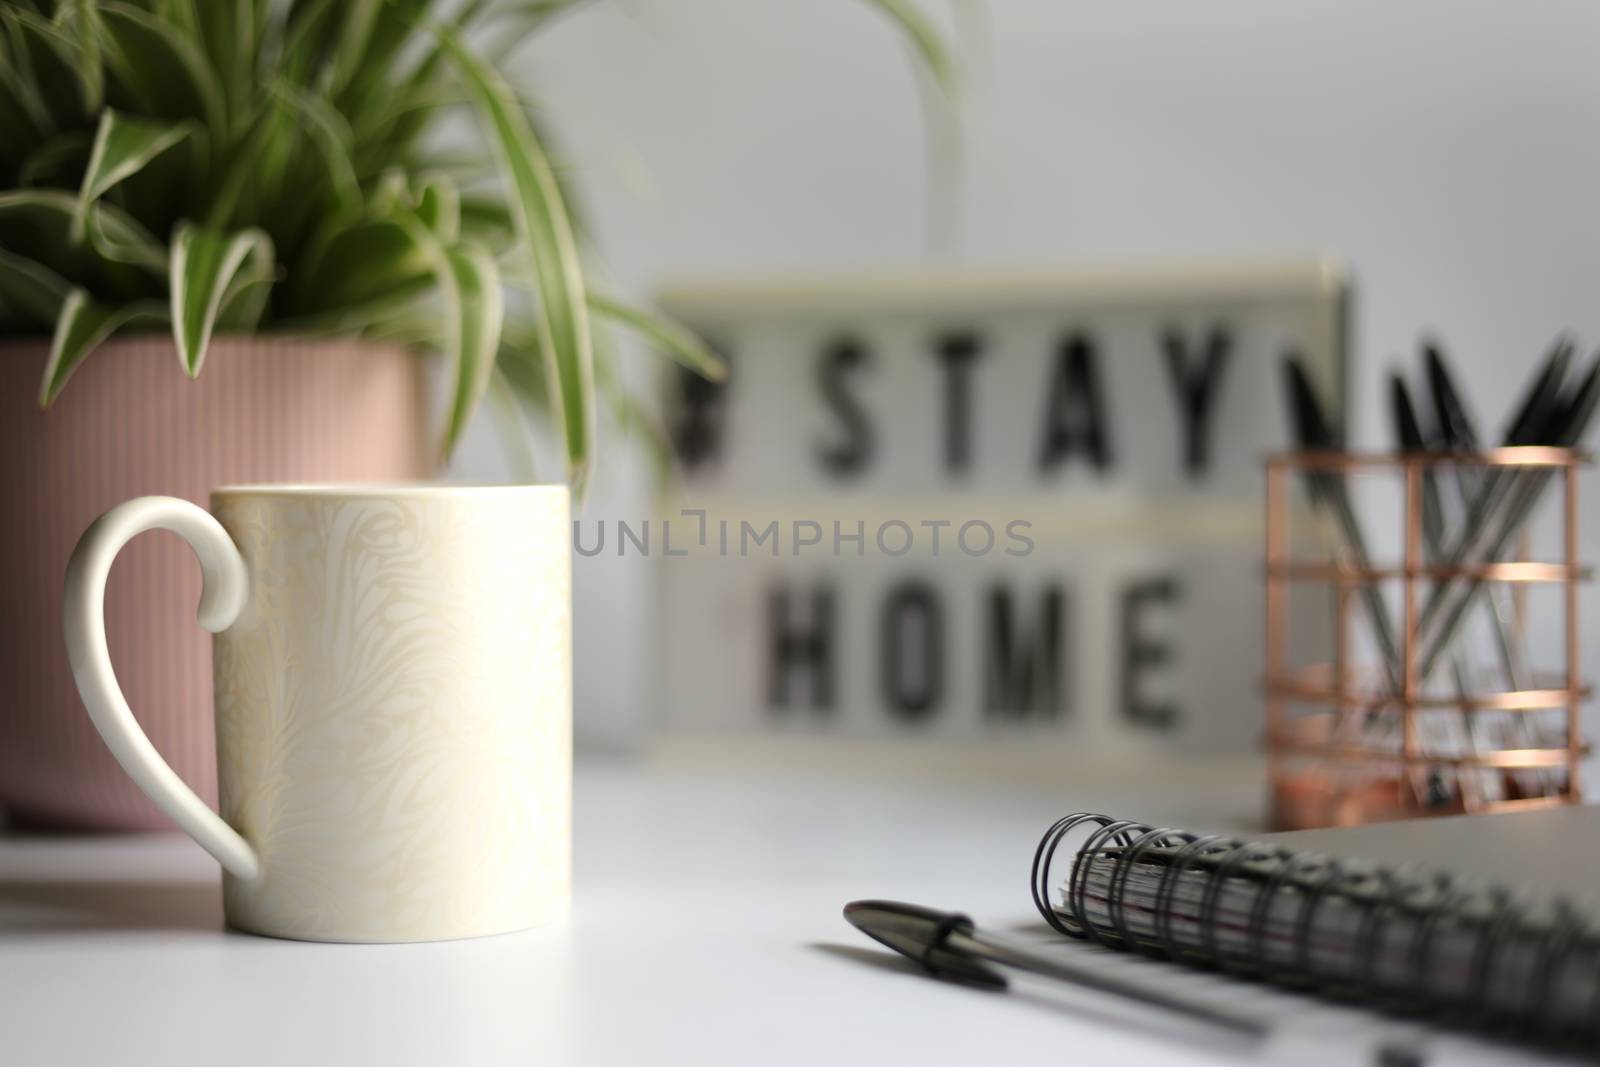 Home office desc concept during self quarantine as preventive measure against virus. Stay safe concept. Cup of coffee, clock, stationery, home plant on white background